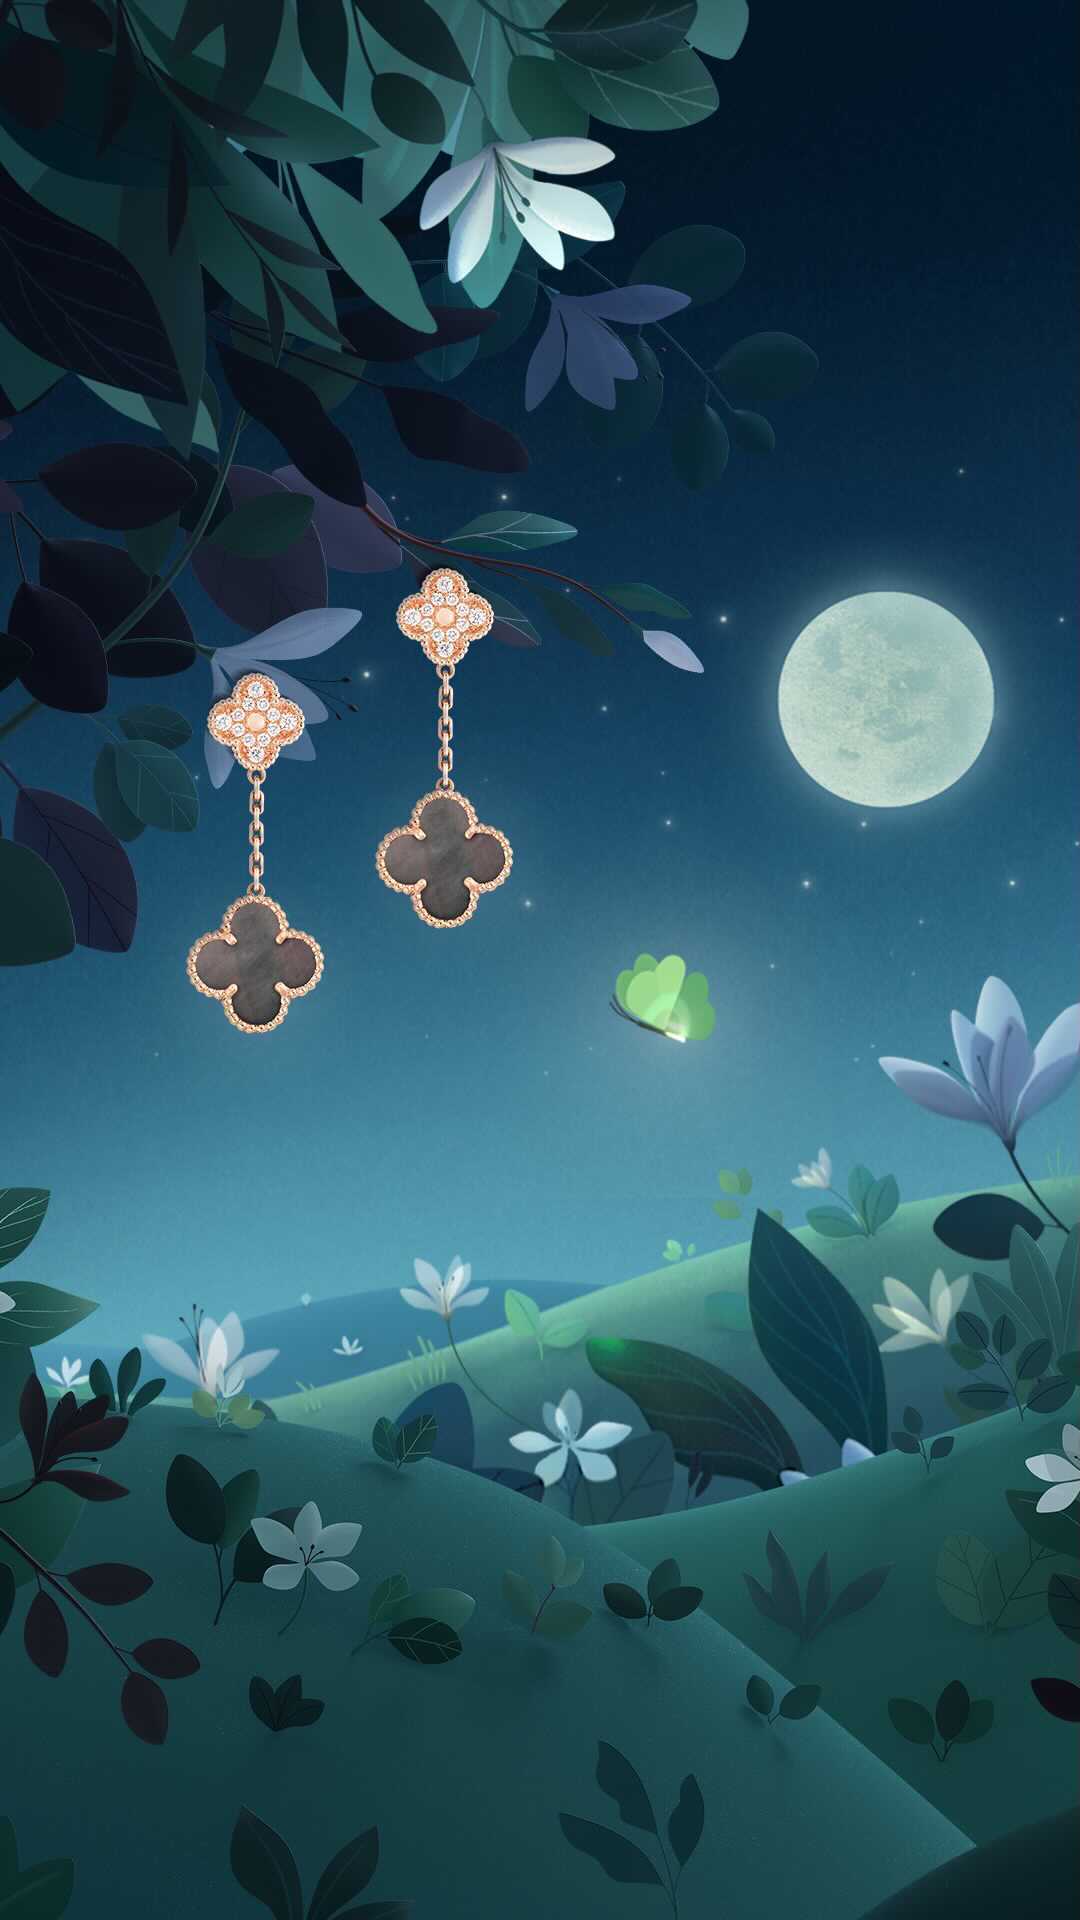 Van Cleef & Arpels - From day to dusk, follow the magic butterfly on its journey through Van Cleef & Arpels' nature and discover lucky creations from the Alhambra collection along the way.
#VCAalhambr...